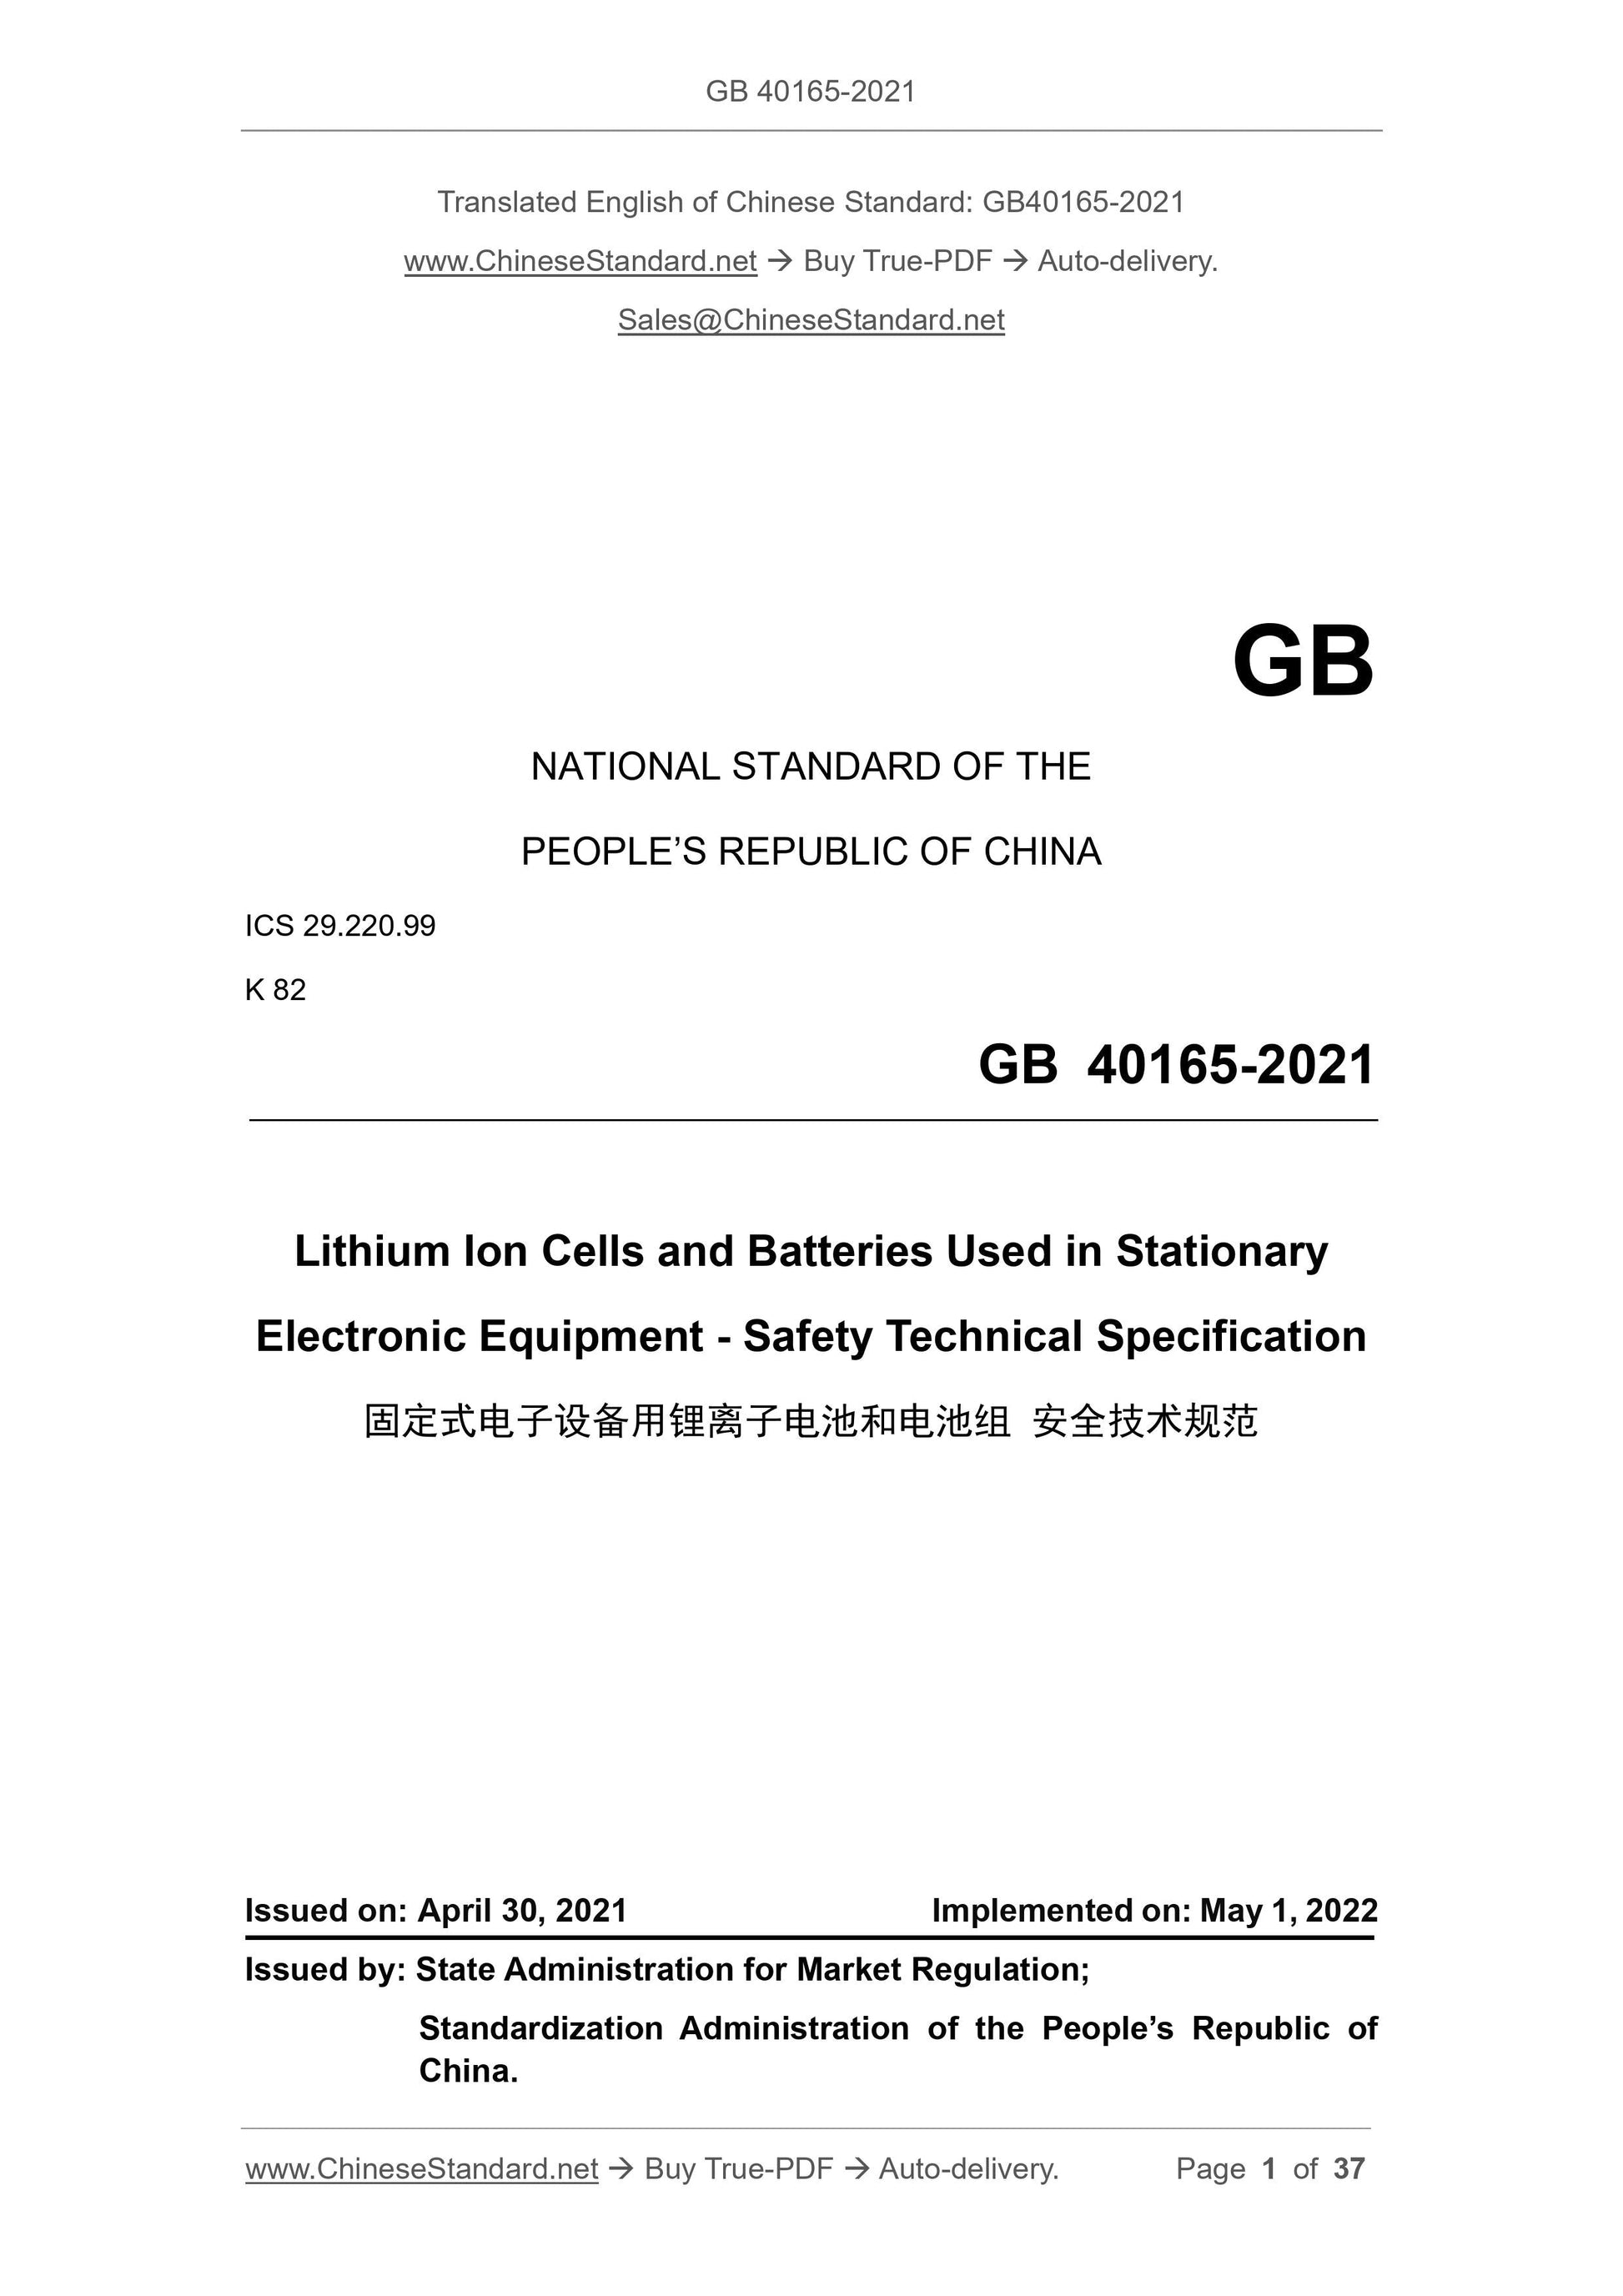 GB 40165-2021 Page 1